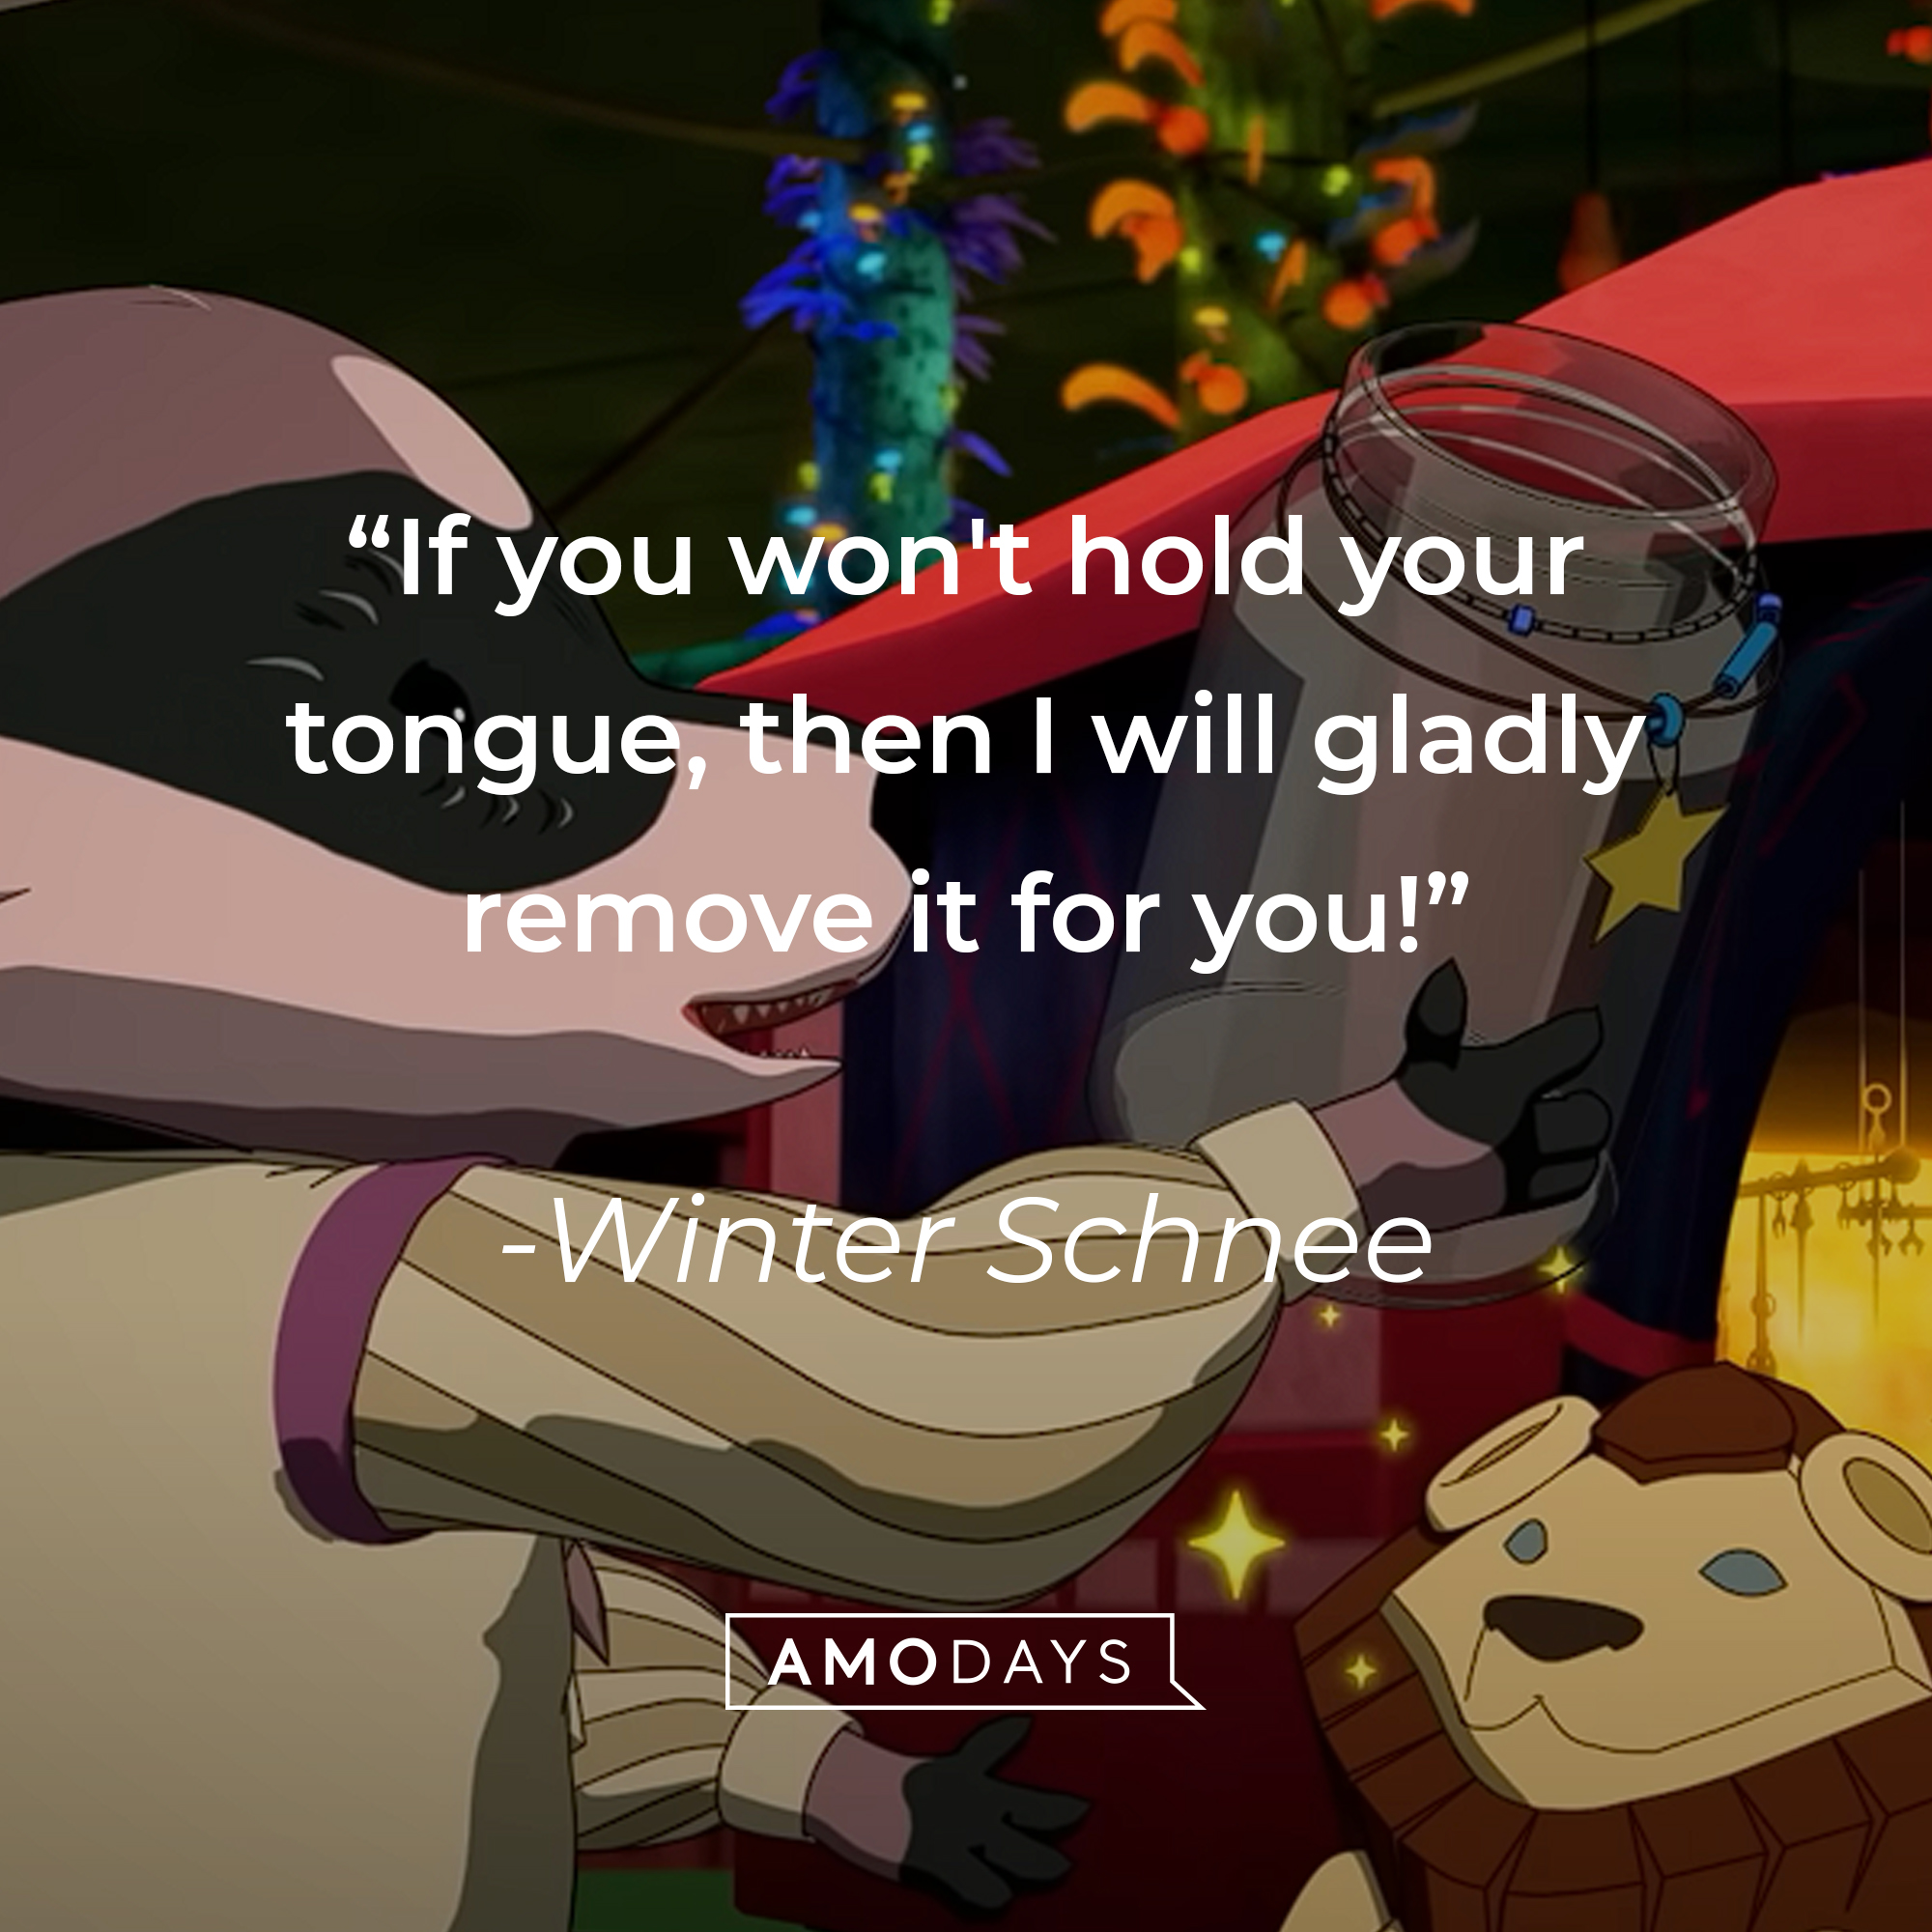 Winter Schnee's quote: "If you won't hold your tongue, then I will gladly remove it for you!" | Source: Youtube.com/crunchyrolldubs